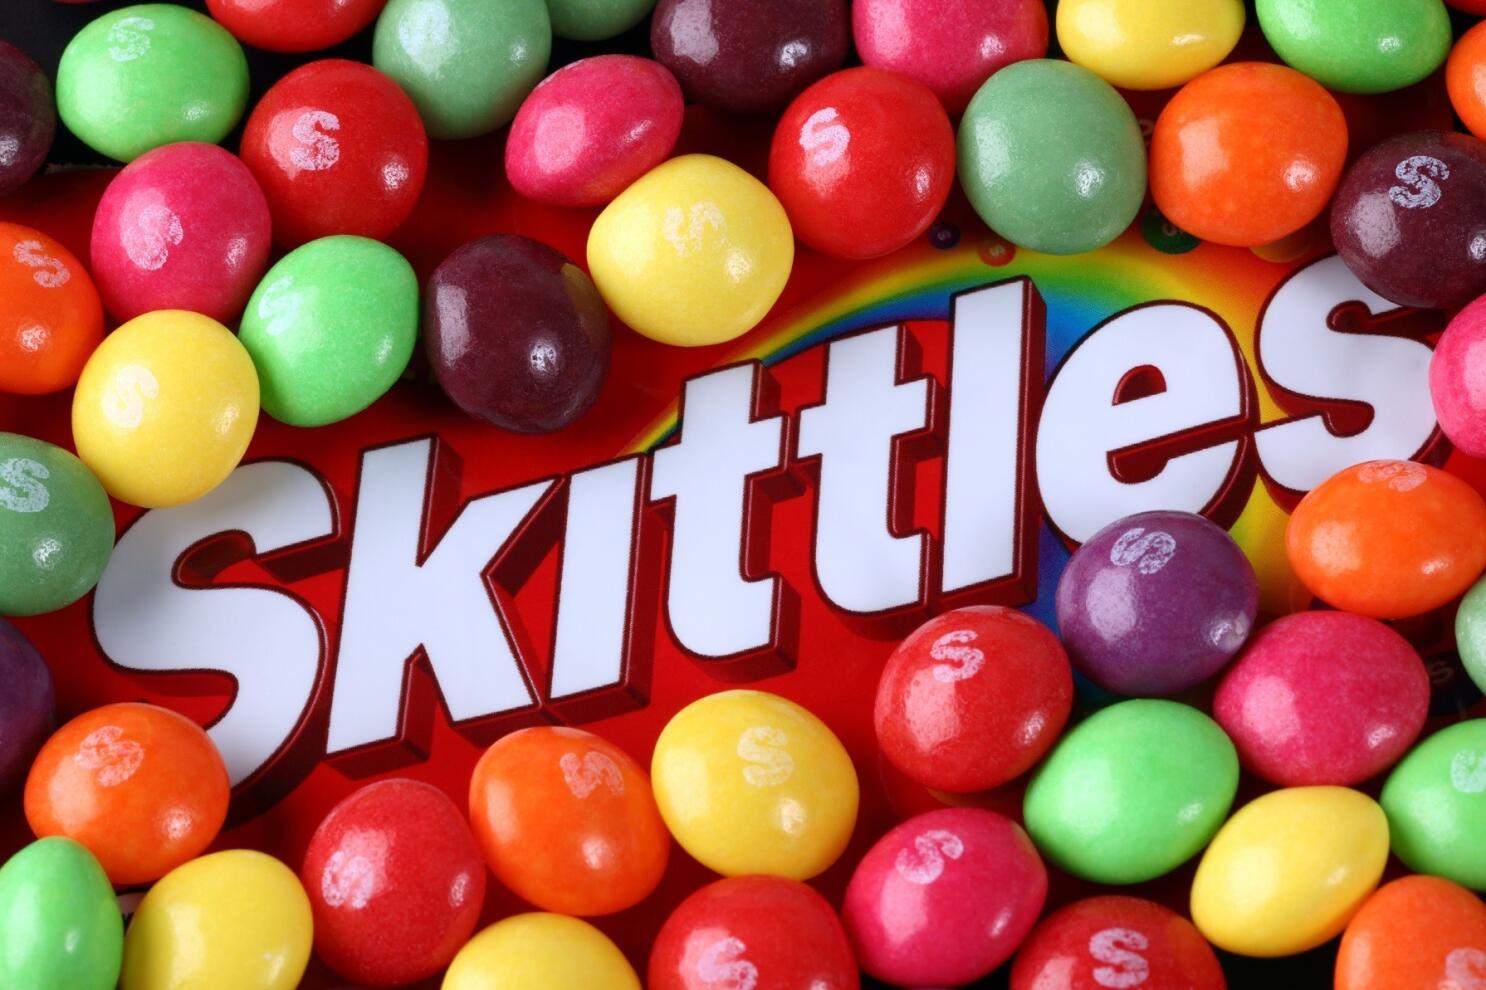 Supreme Skittles and Every Other Crazy Food Collab We Got!